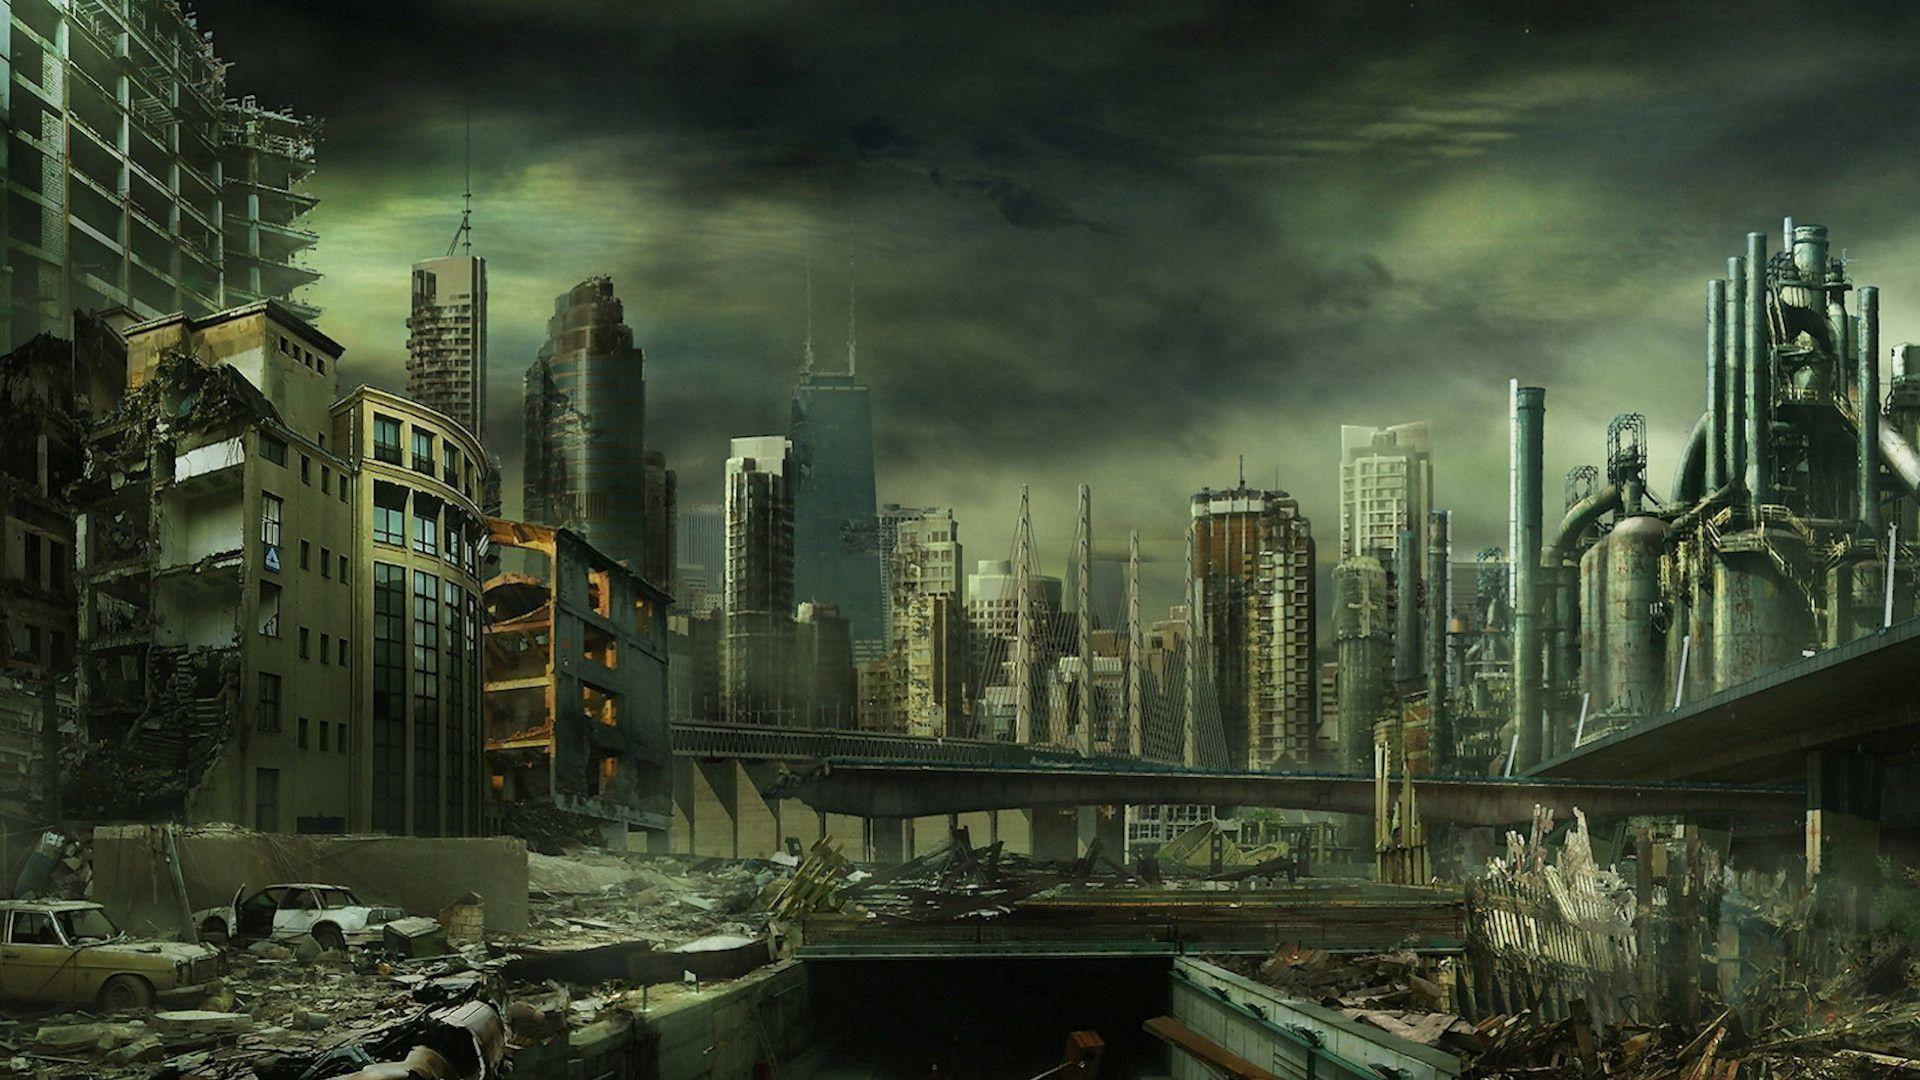 image For > Destroyed City Background HD. Futuristic